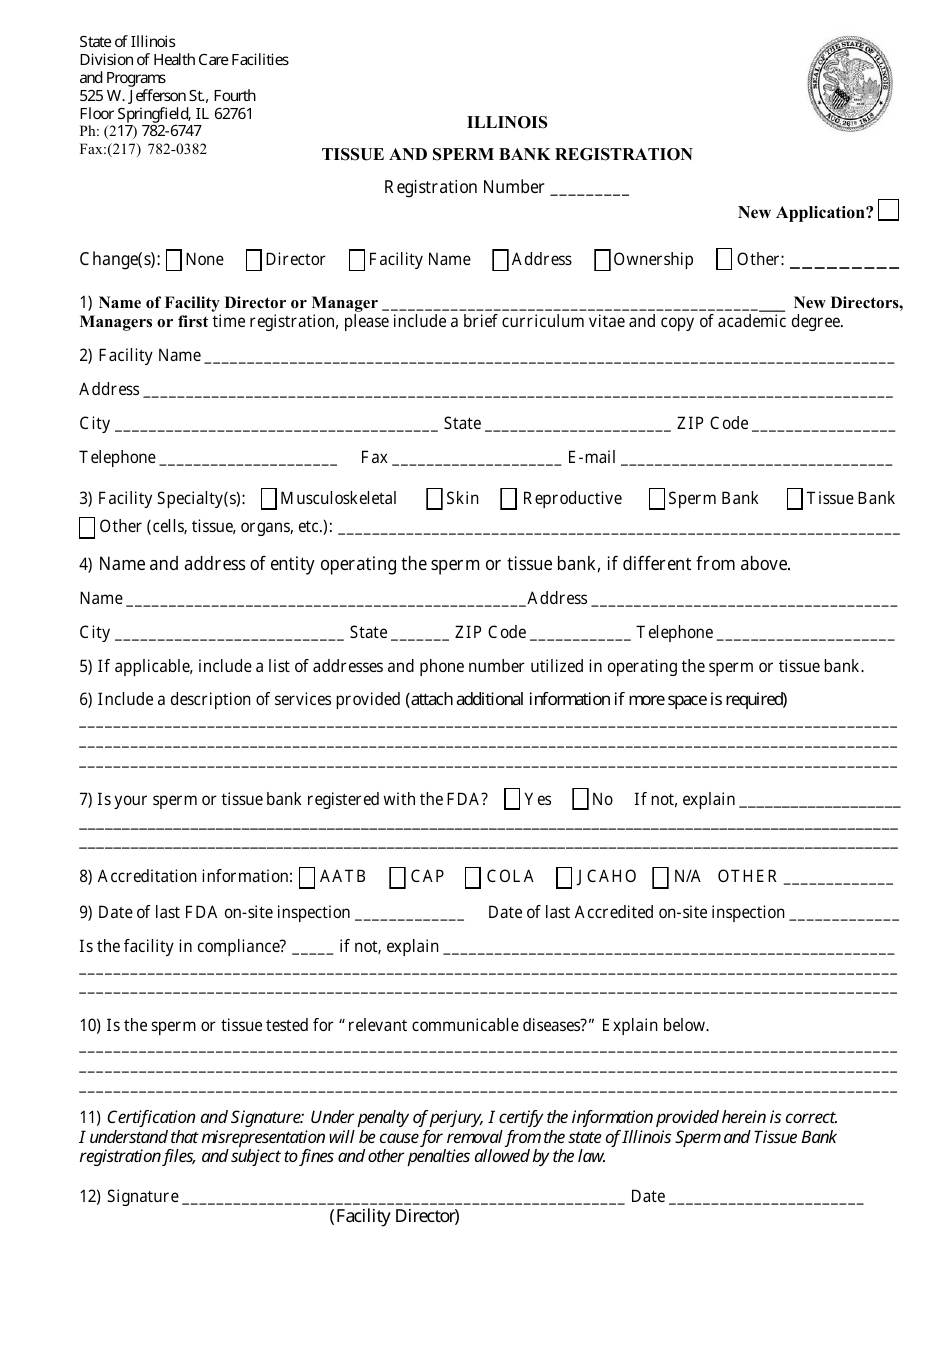 Illinois Tissue and Sperm Bank Registration Form - Illinois, Page 1